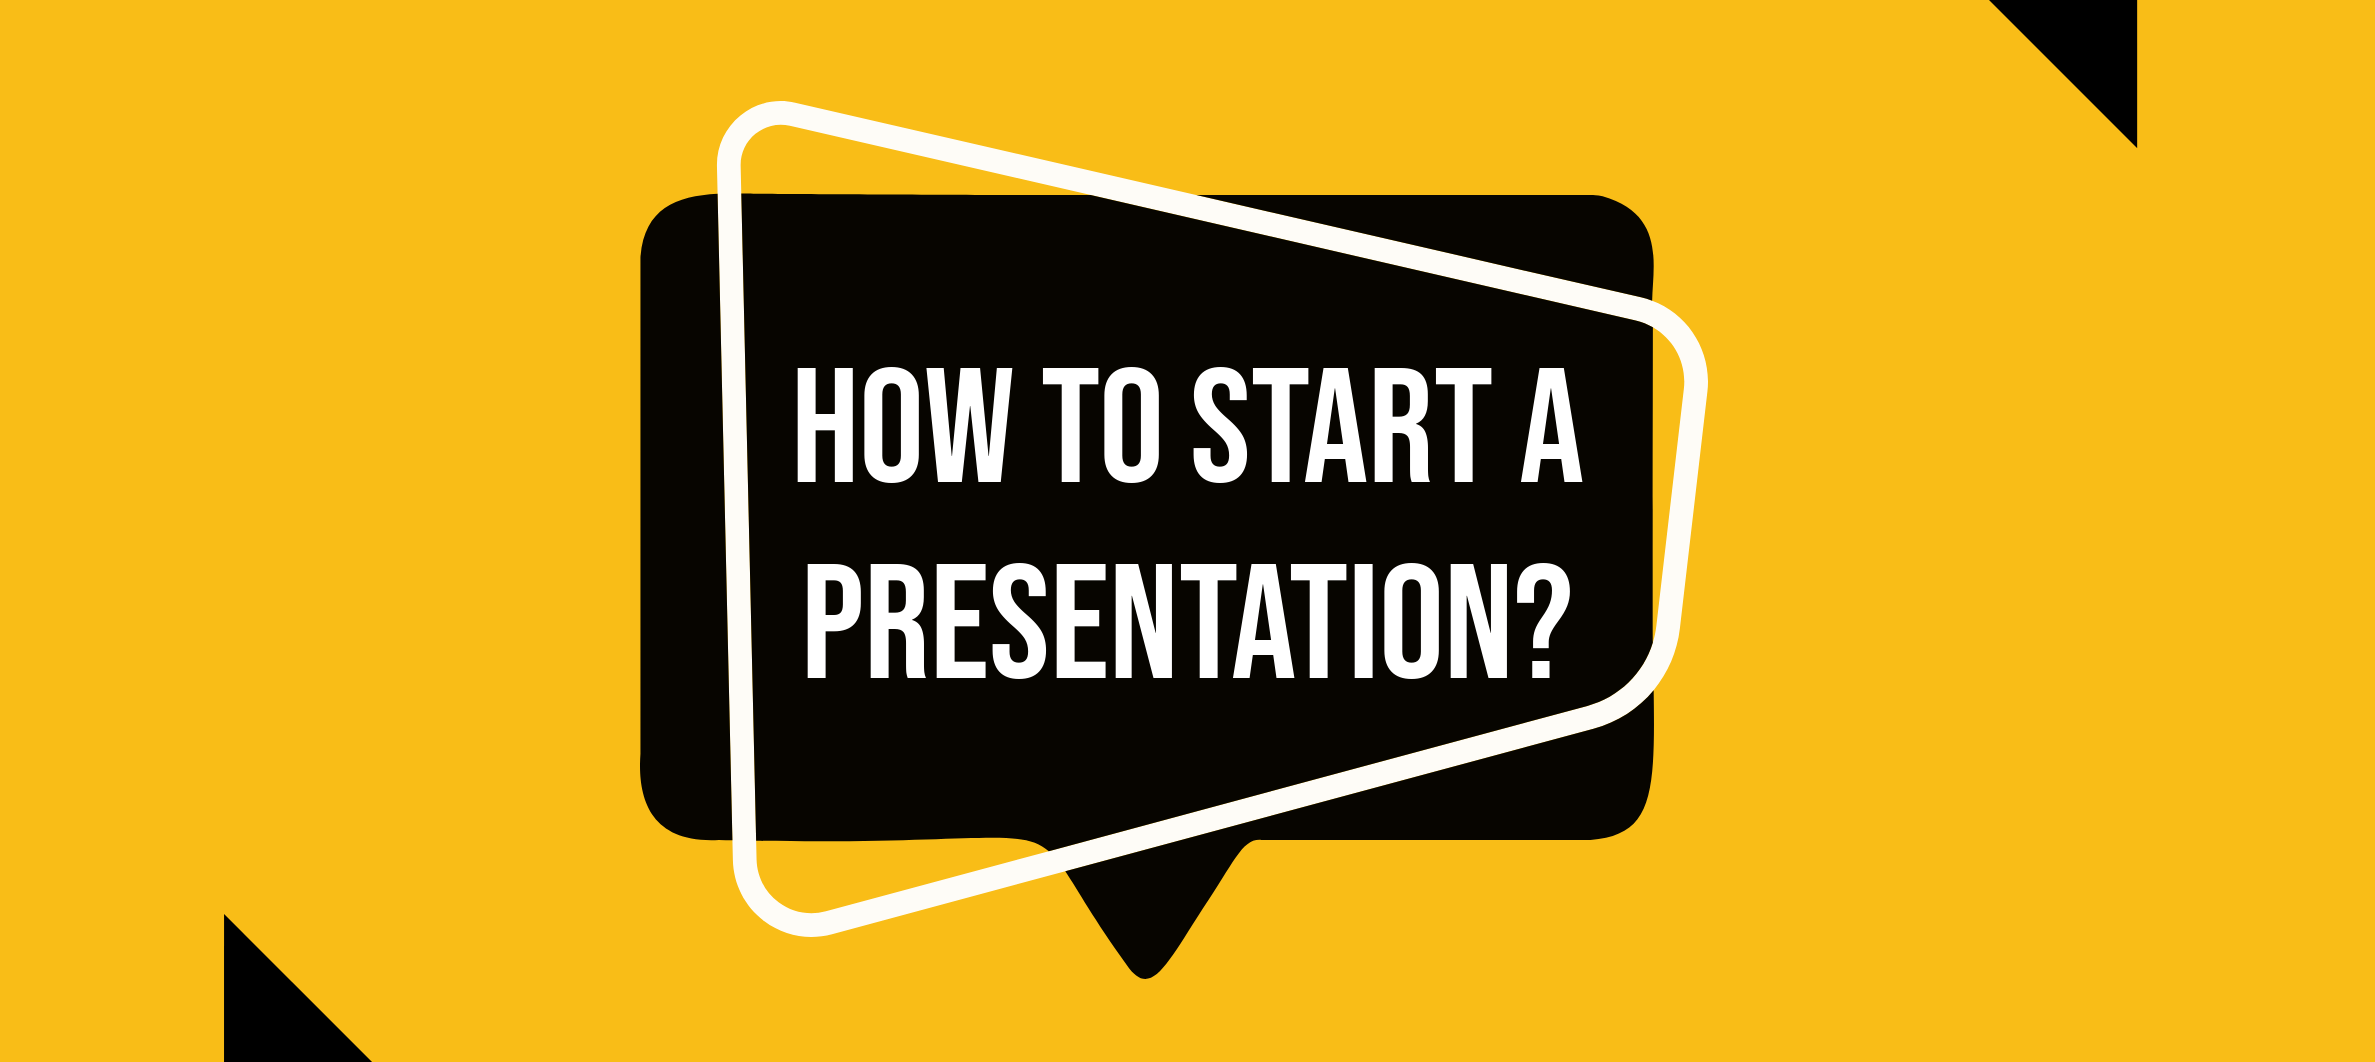 at the start of a presentation